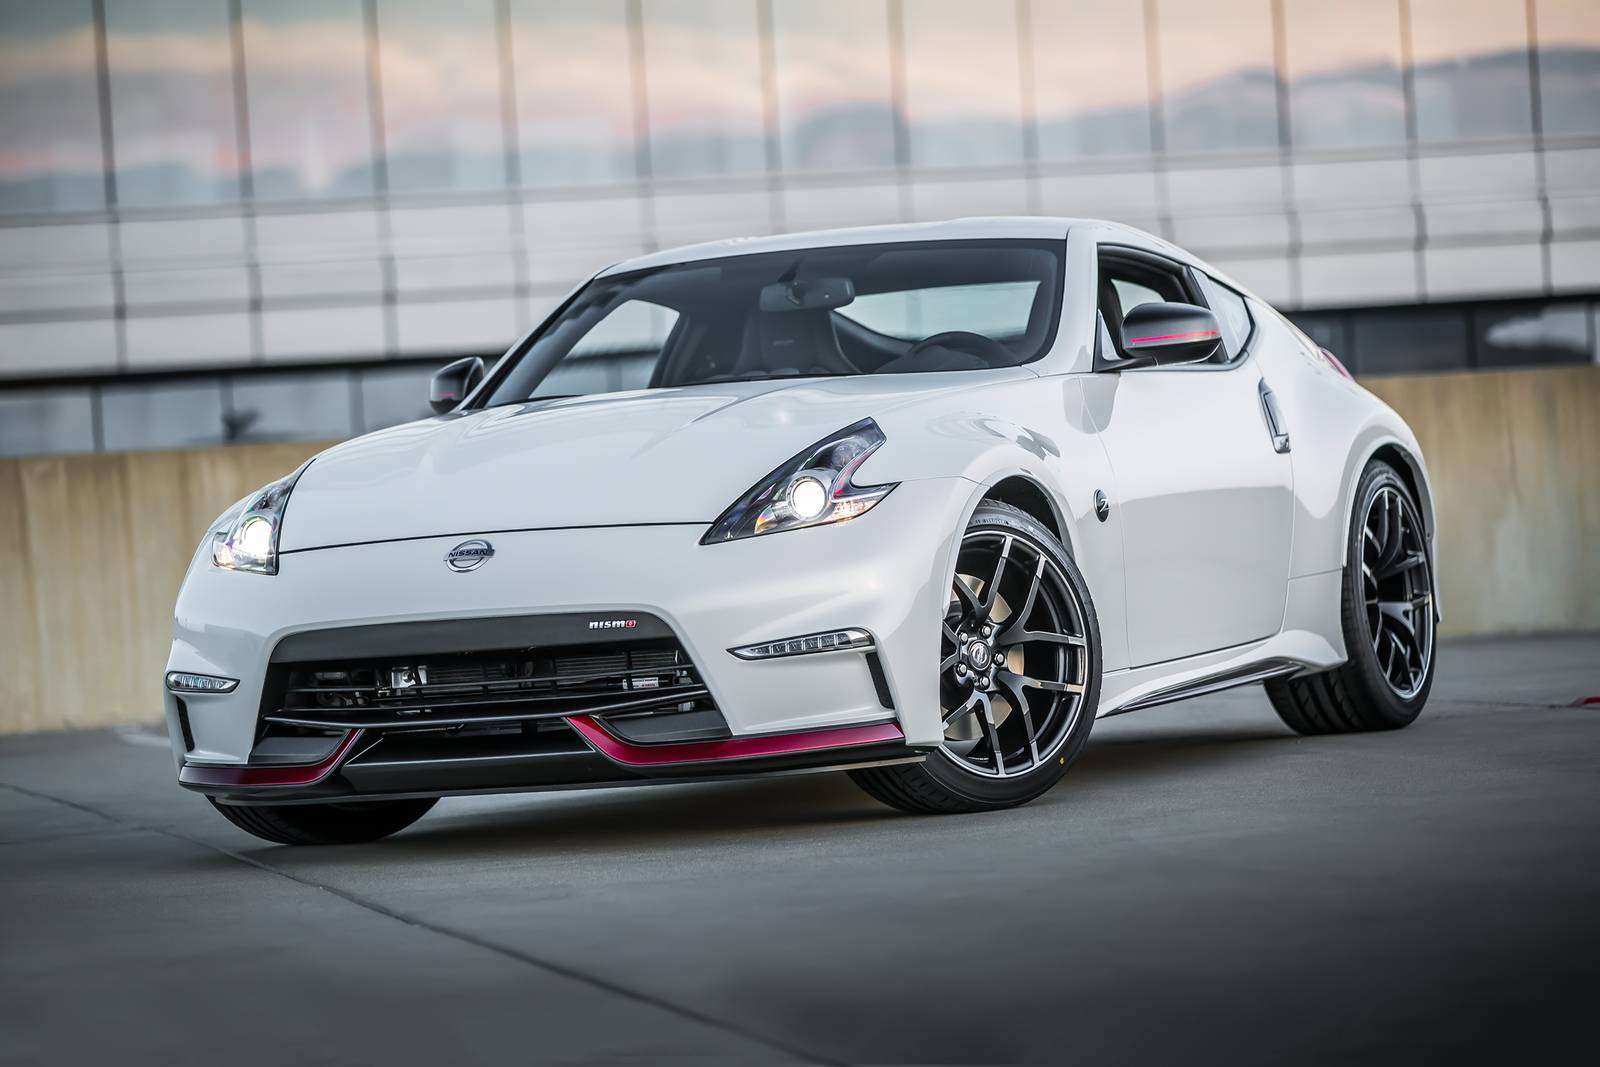 Used 2019 Nissan 370Z NISMO Review | Edmunds